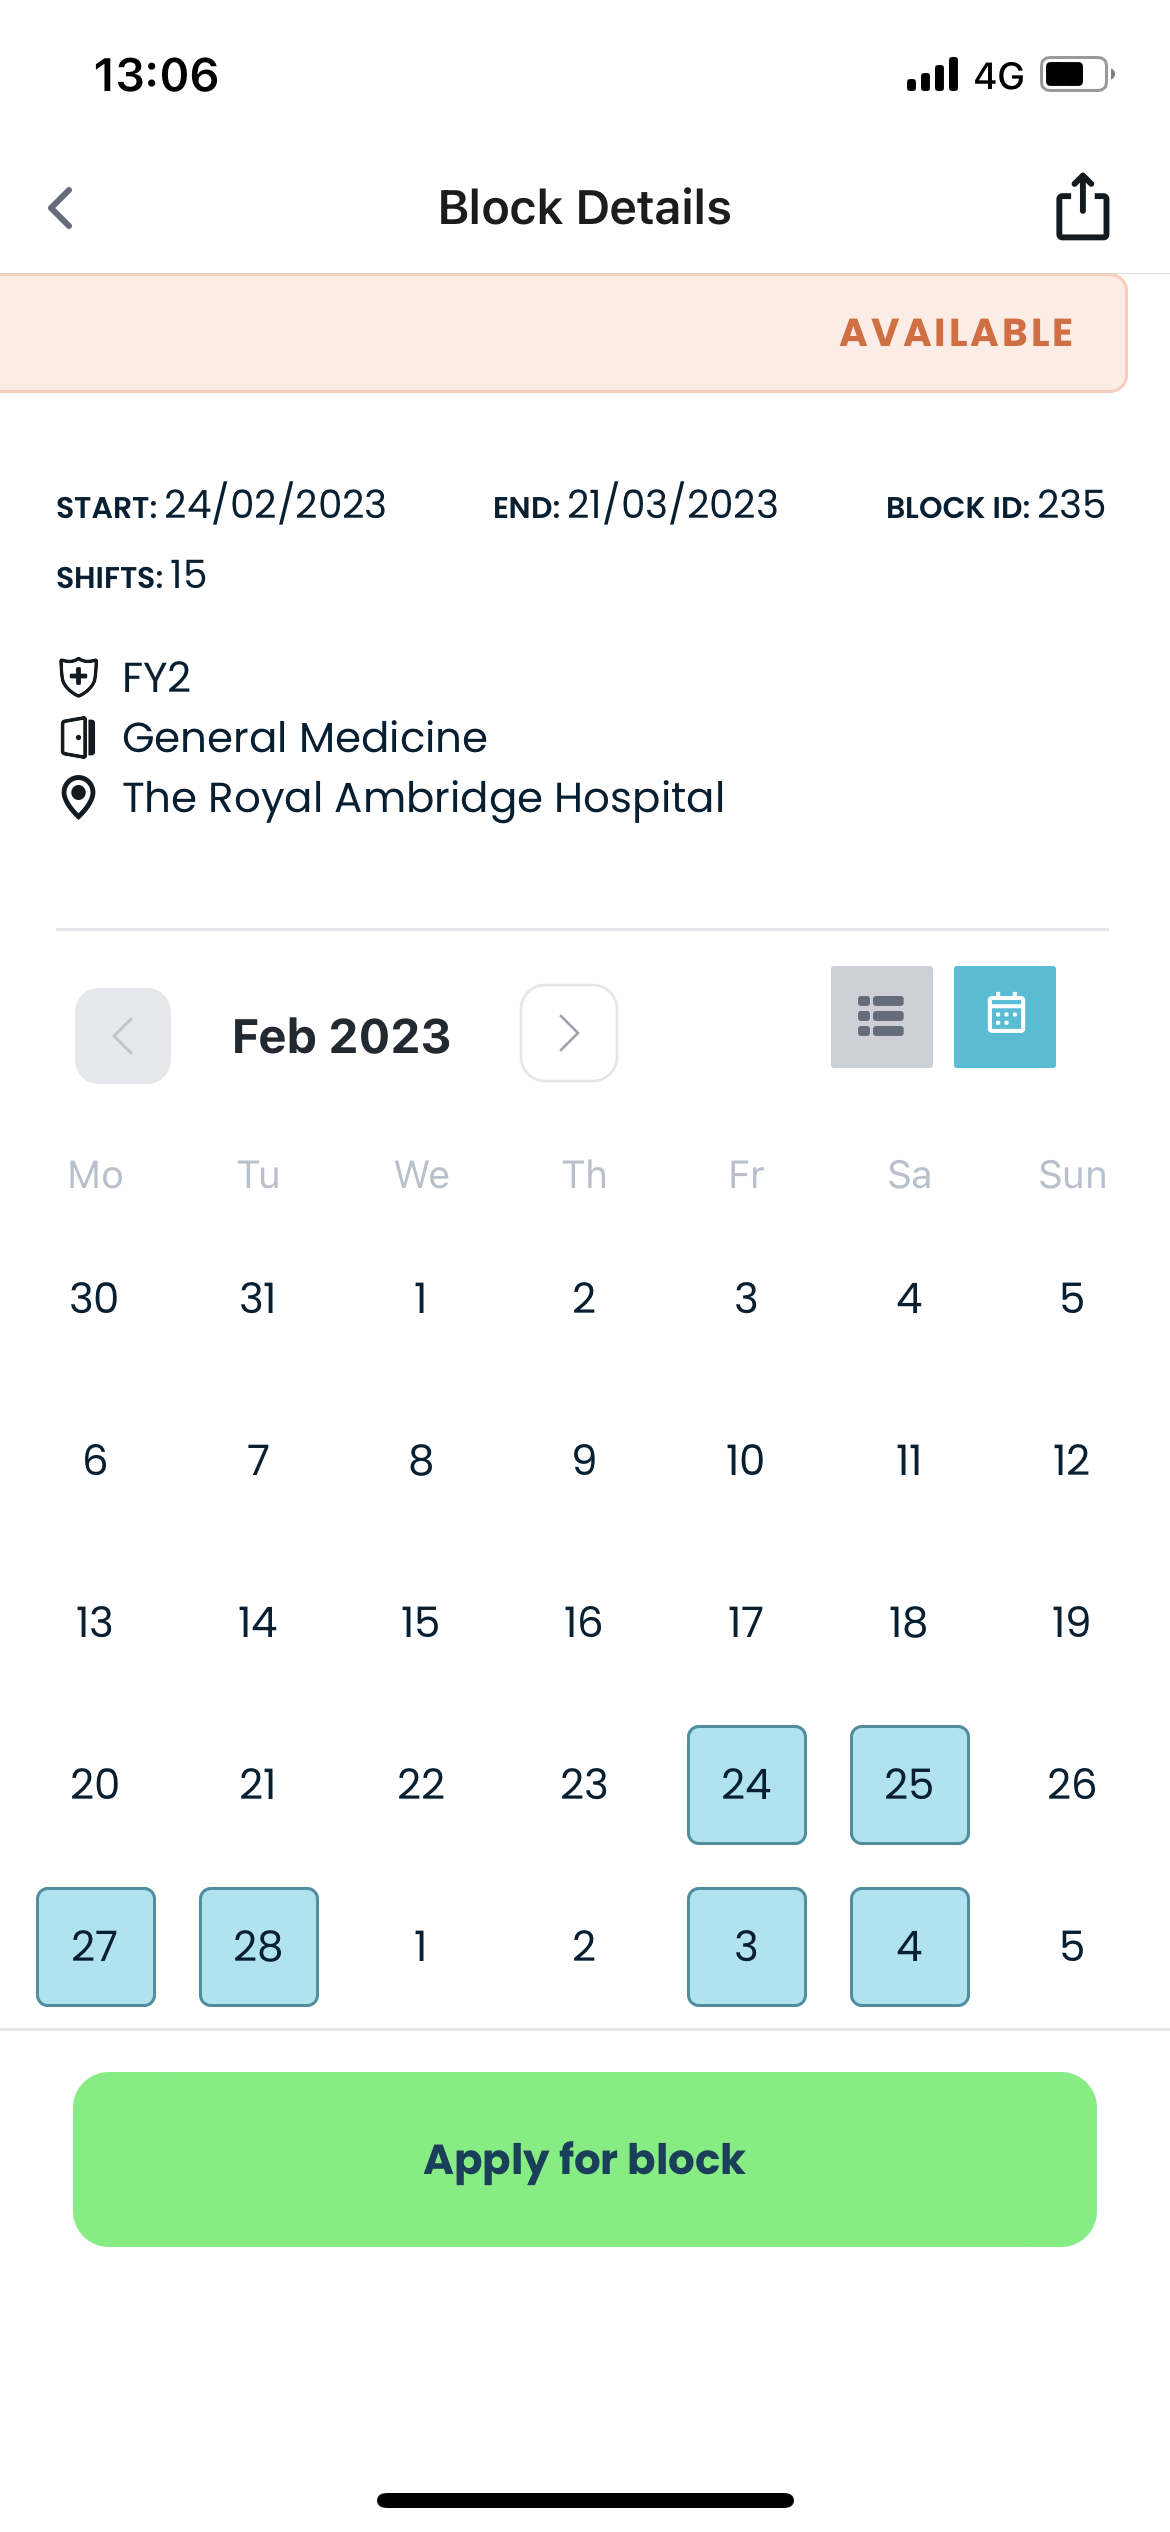 The calendar functionality clearly shows the dates on which shifts occur within the block. Click on the date to view further shift details.